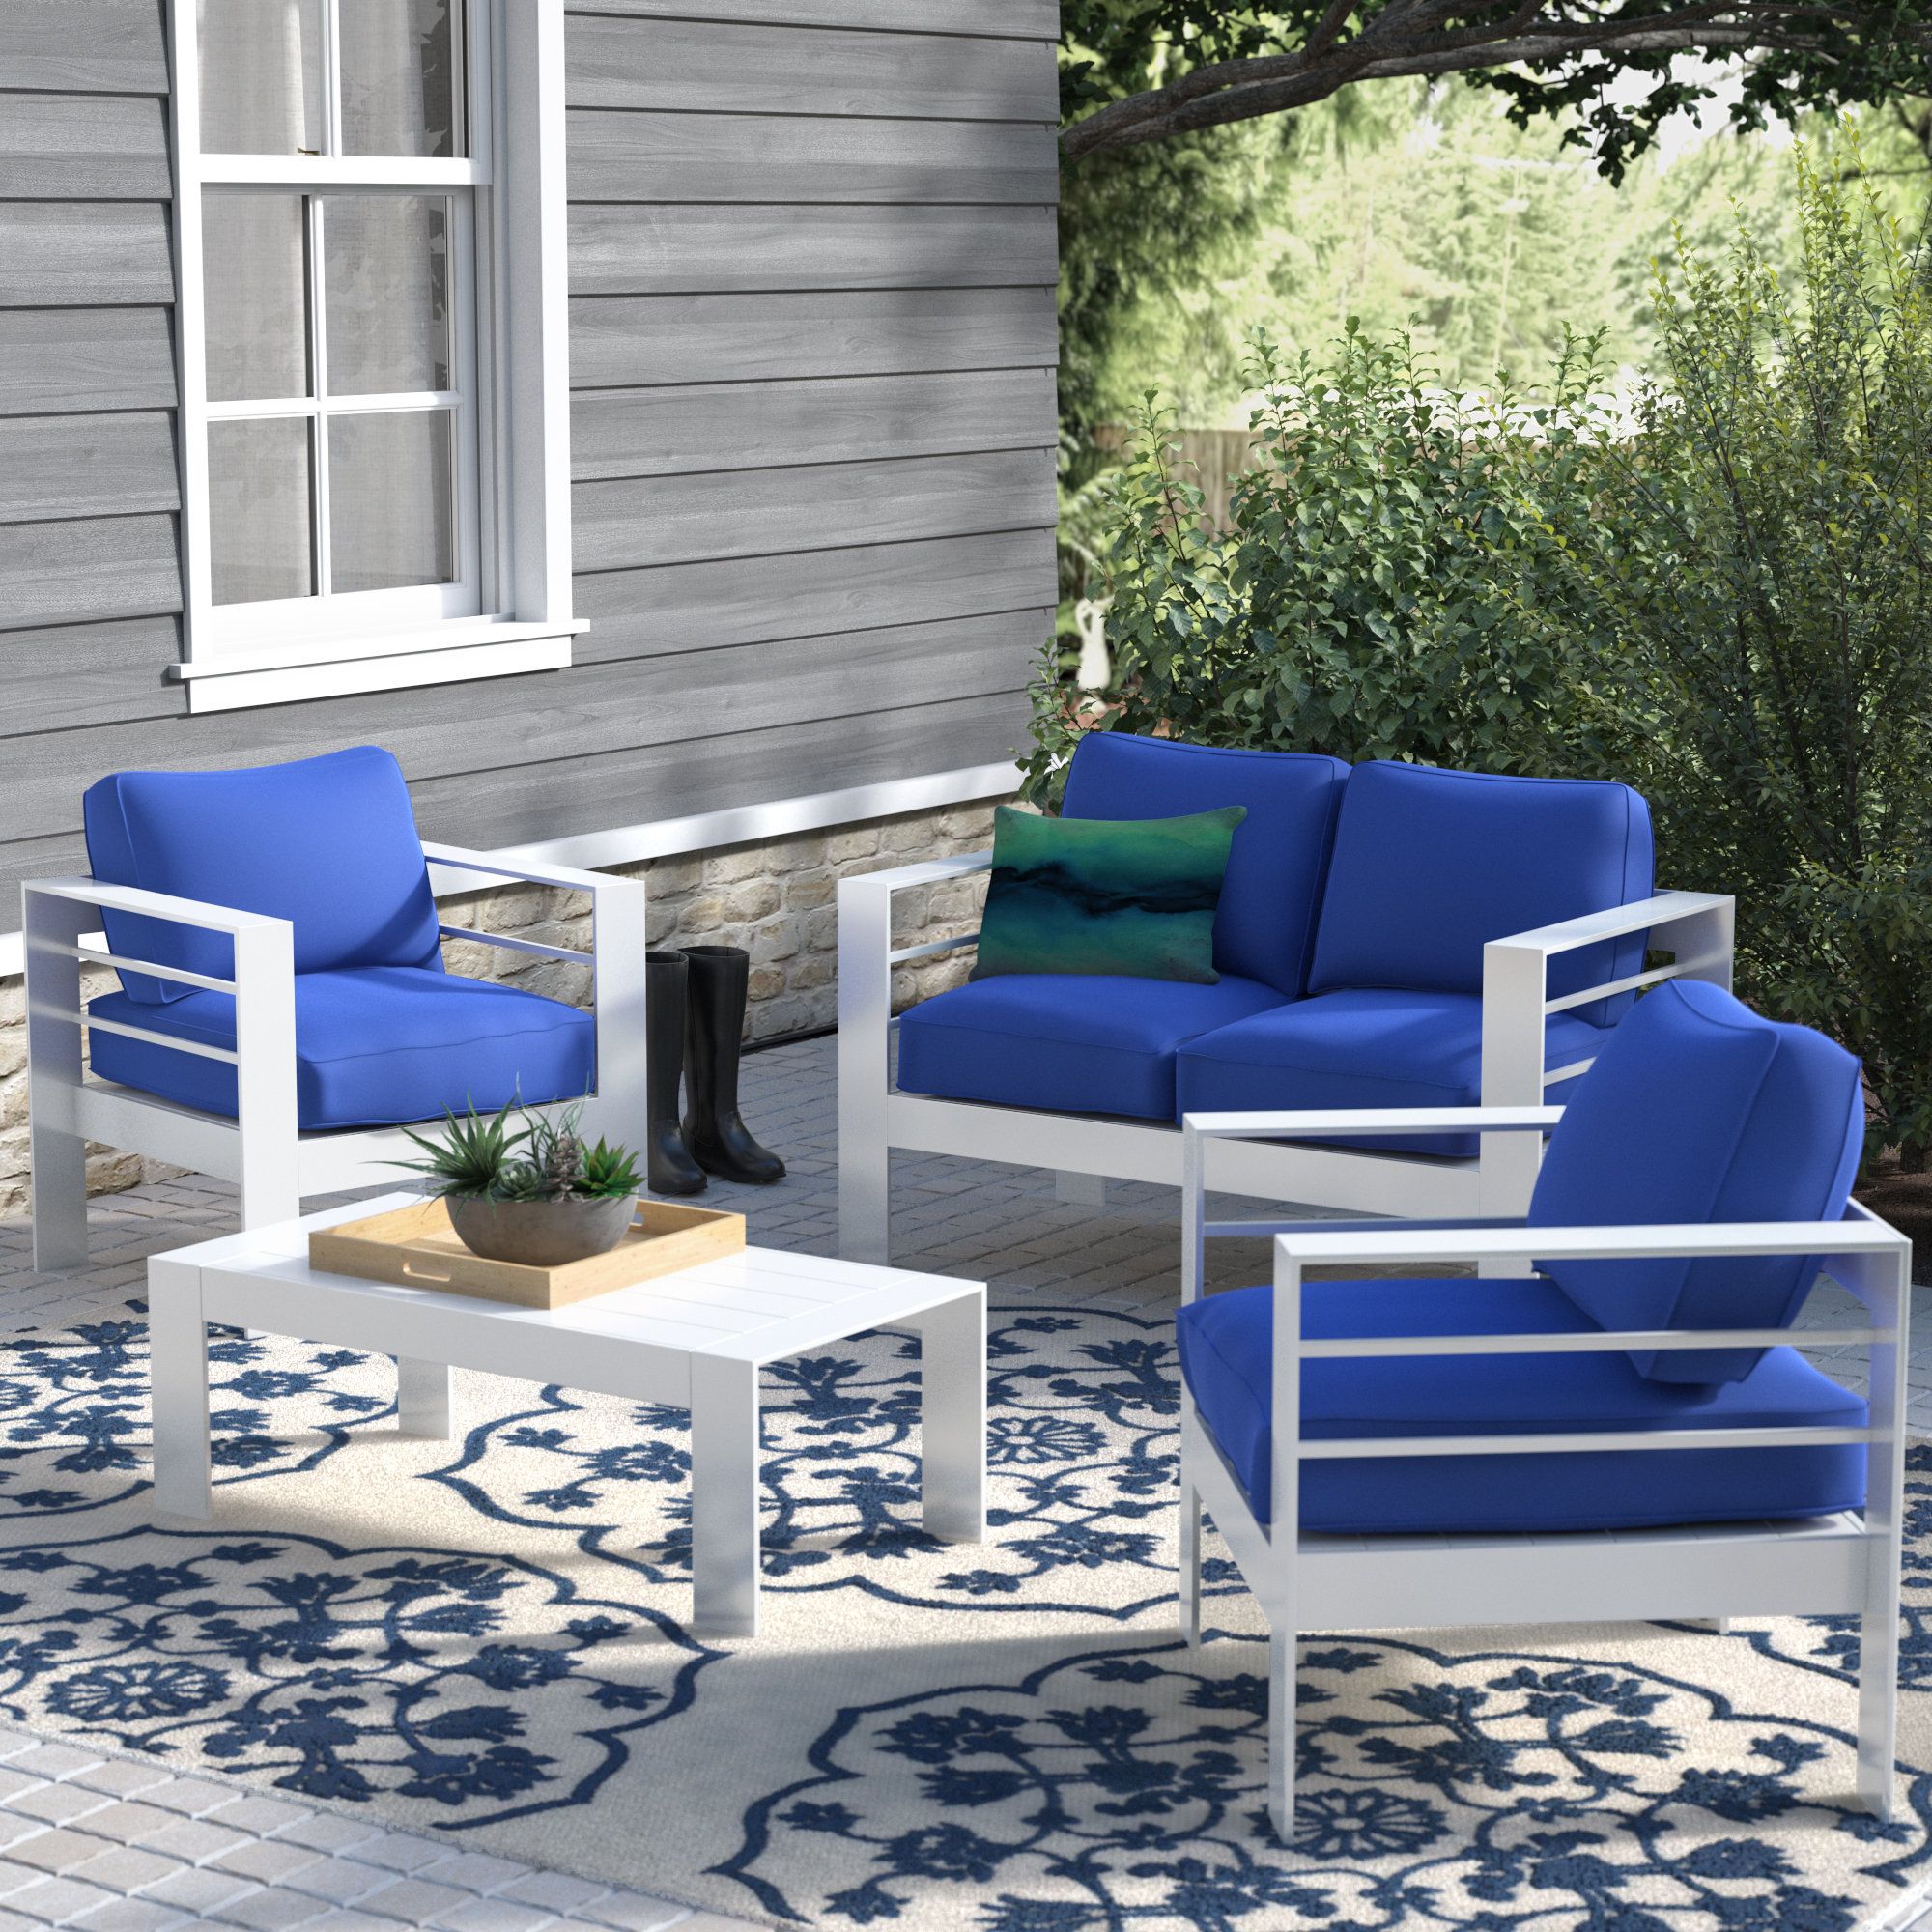 Michal 4 Piece Sofa Seating Group With Cushions Intended For Famous Michal Patio Sofas With Cushions (View 1 of 20)